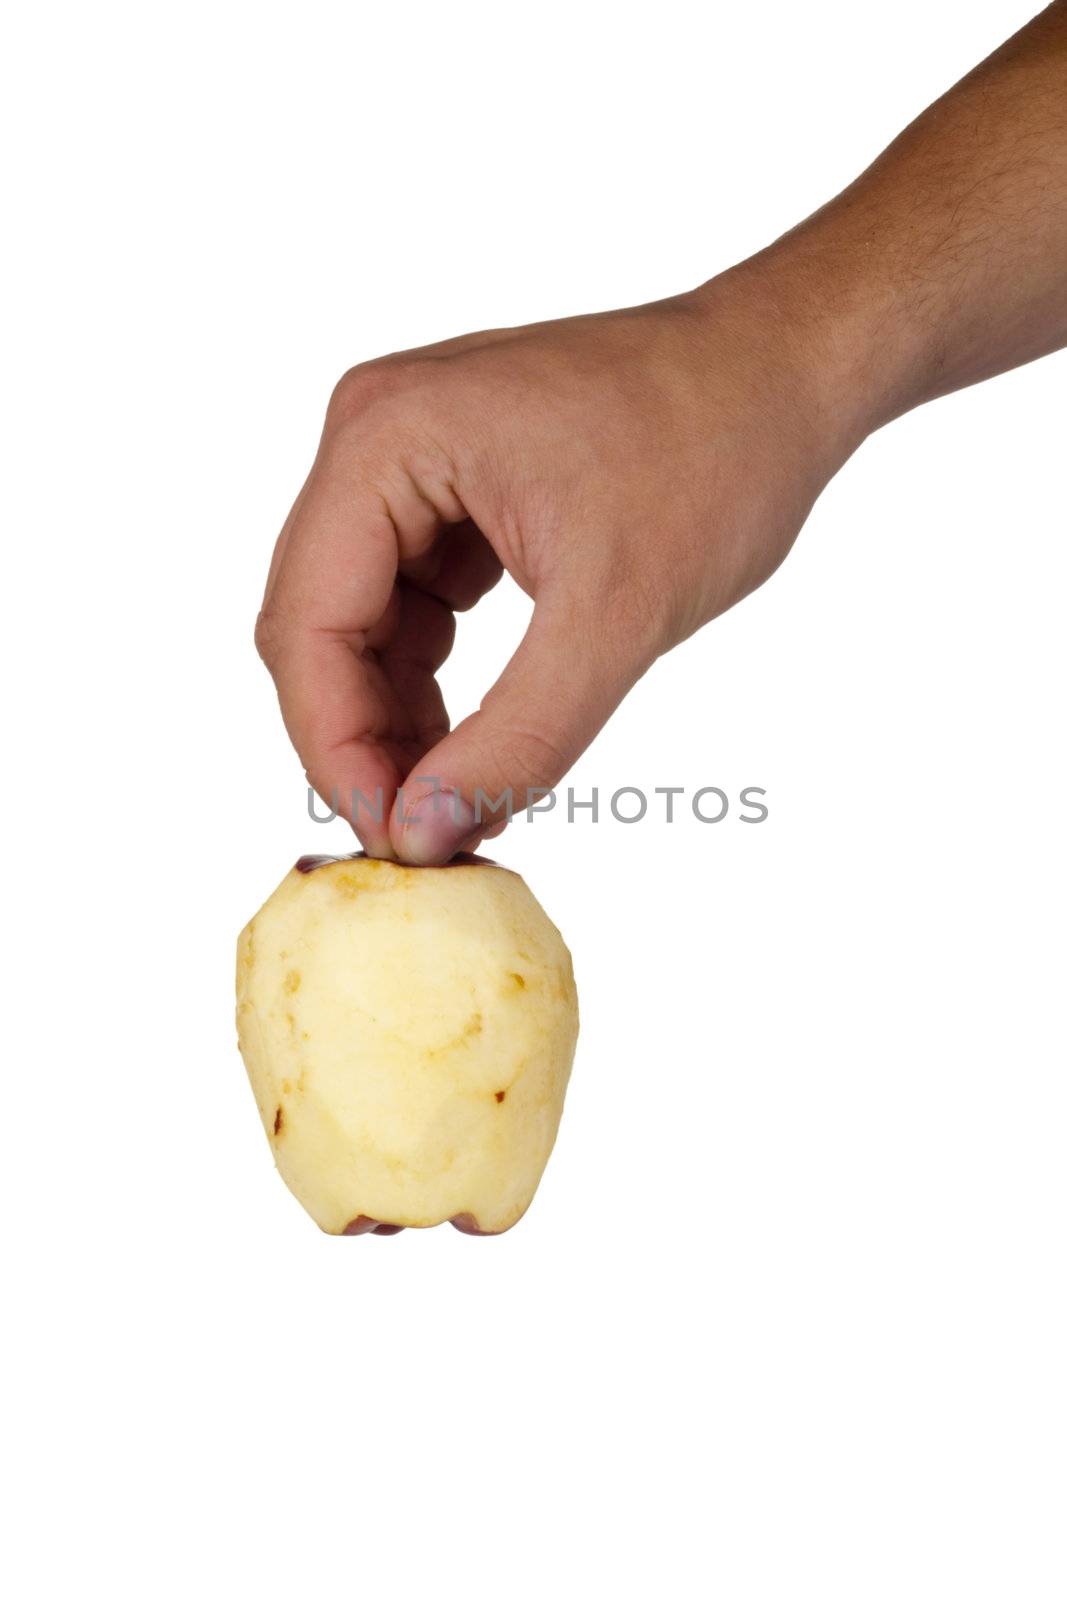 Peeled Braeburn apple in a hand isolated on a white background.